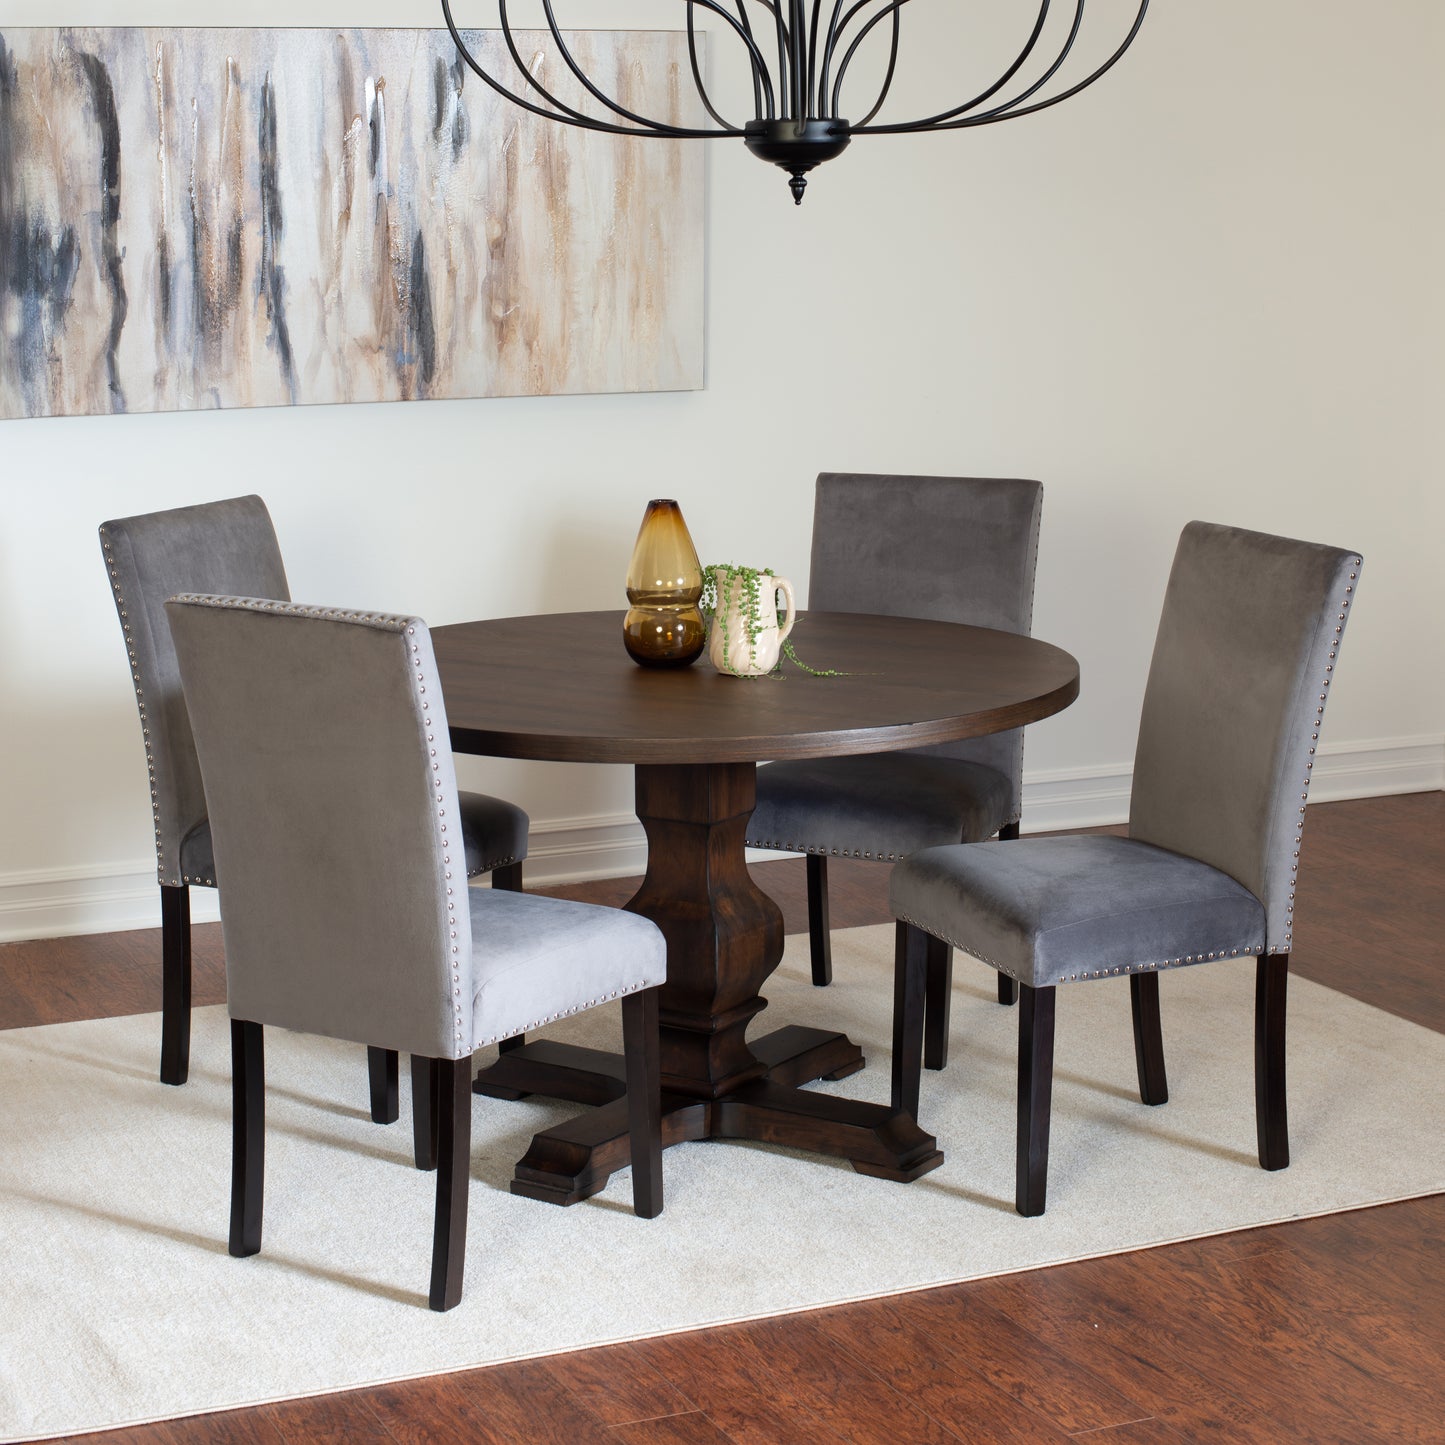 Fordsville 5-piece Dining Set, Pedestal Round Table with 4 Stylish Chairs